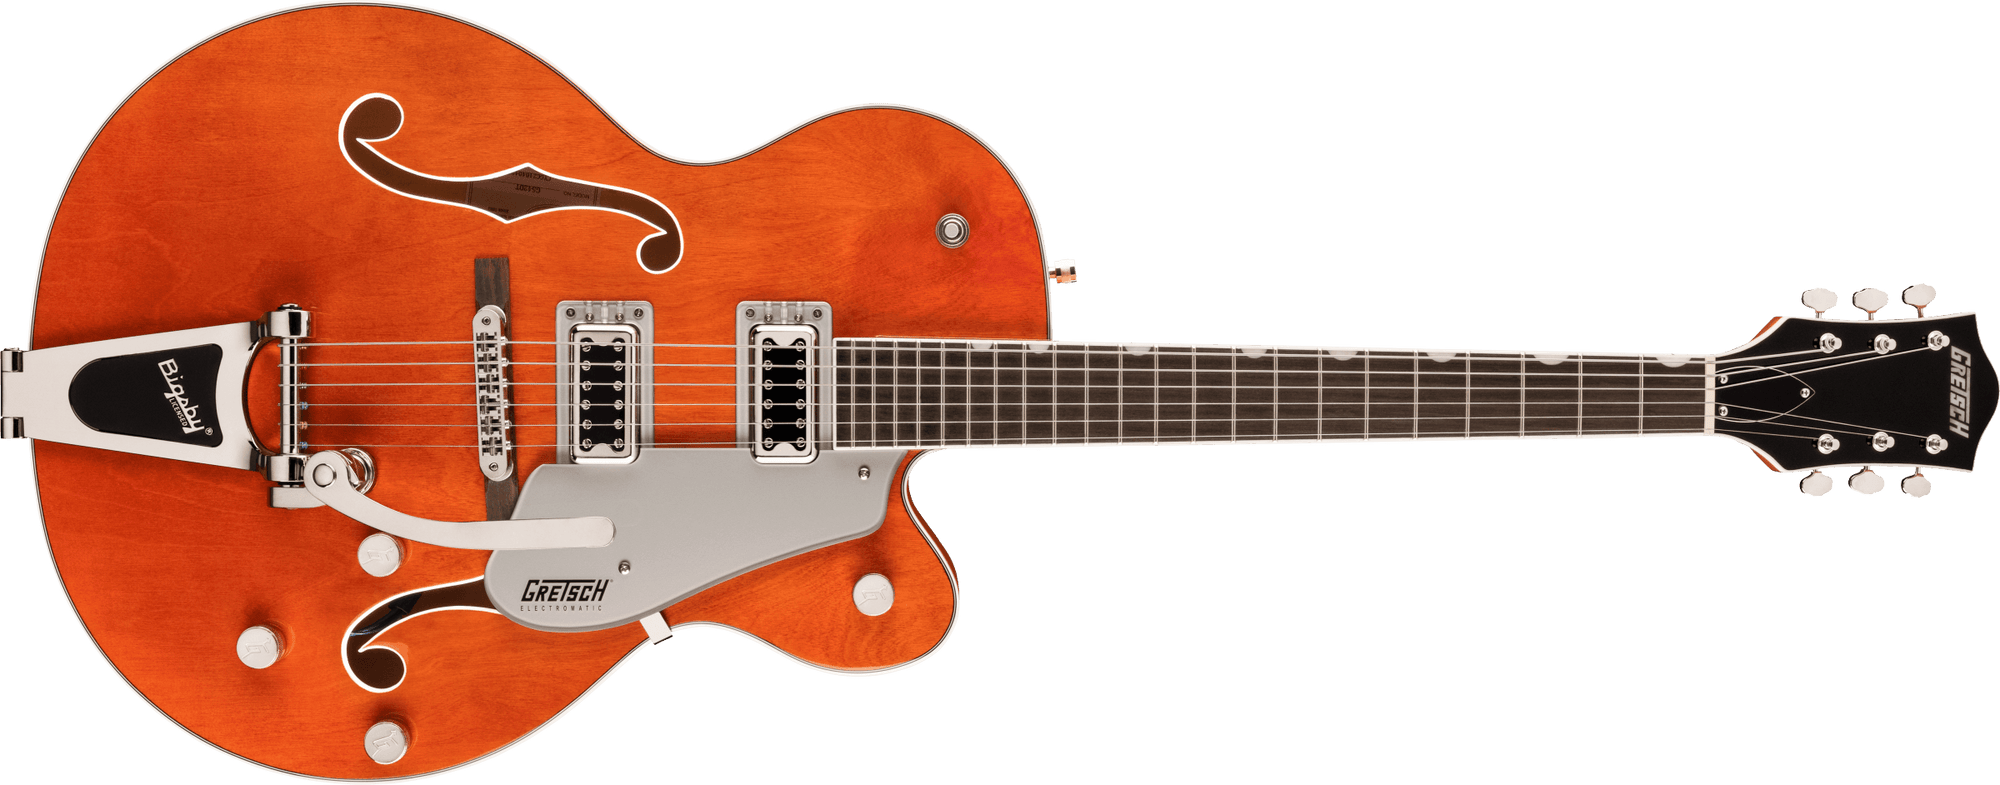 G5420T Electromatic Classic Hollow Body Single-Cut with Bigsby